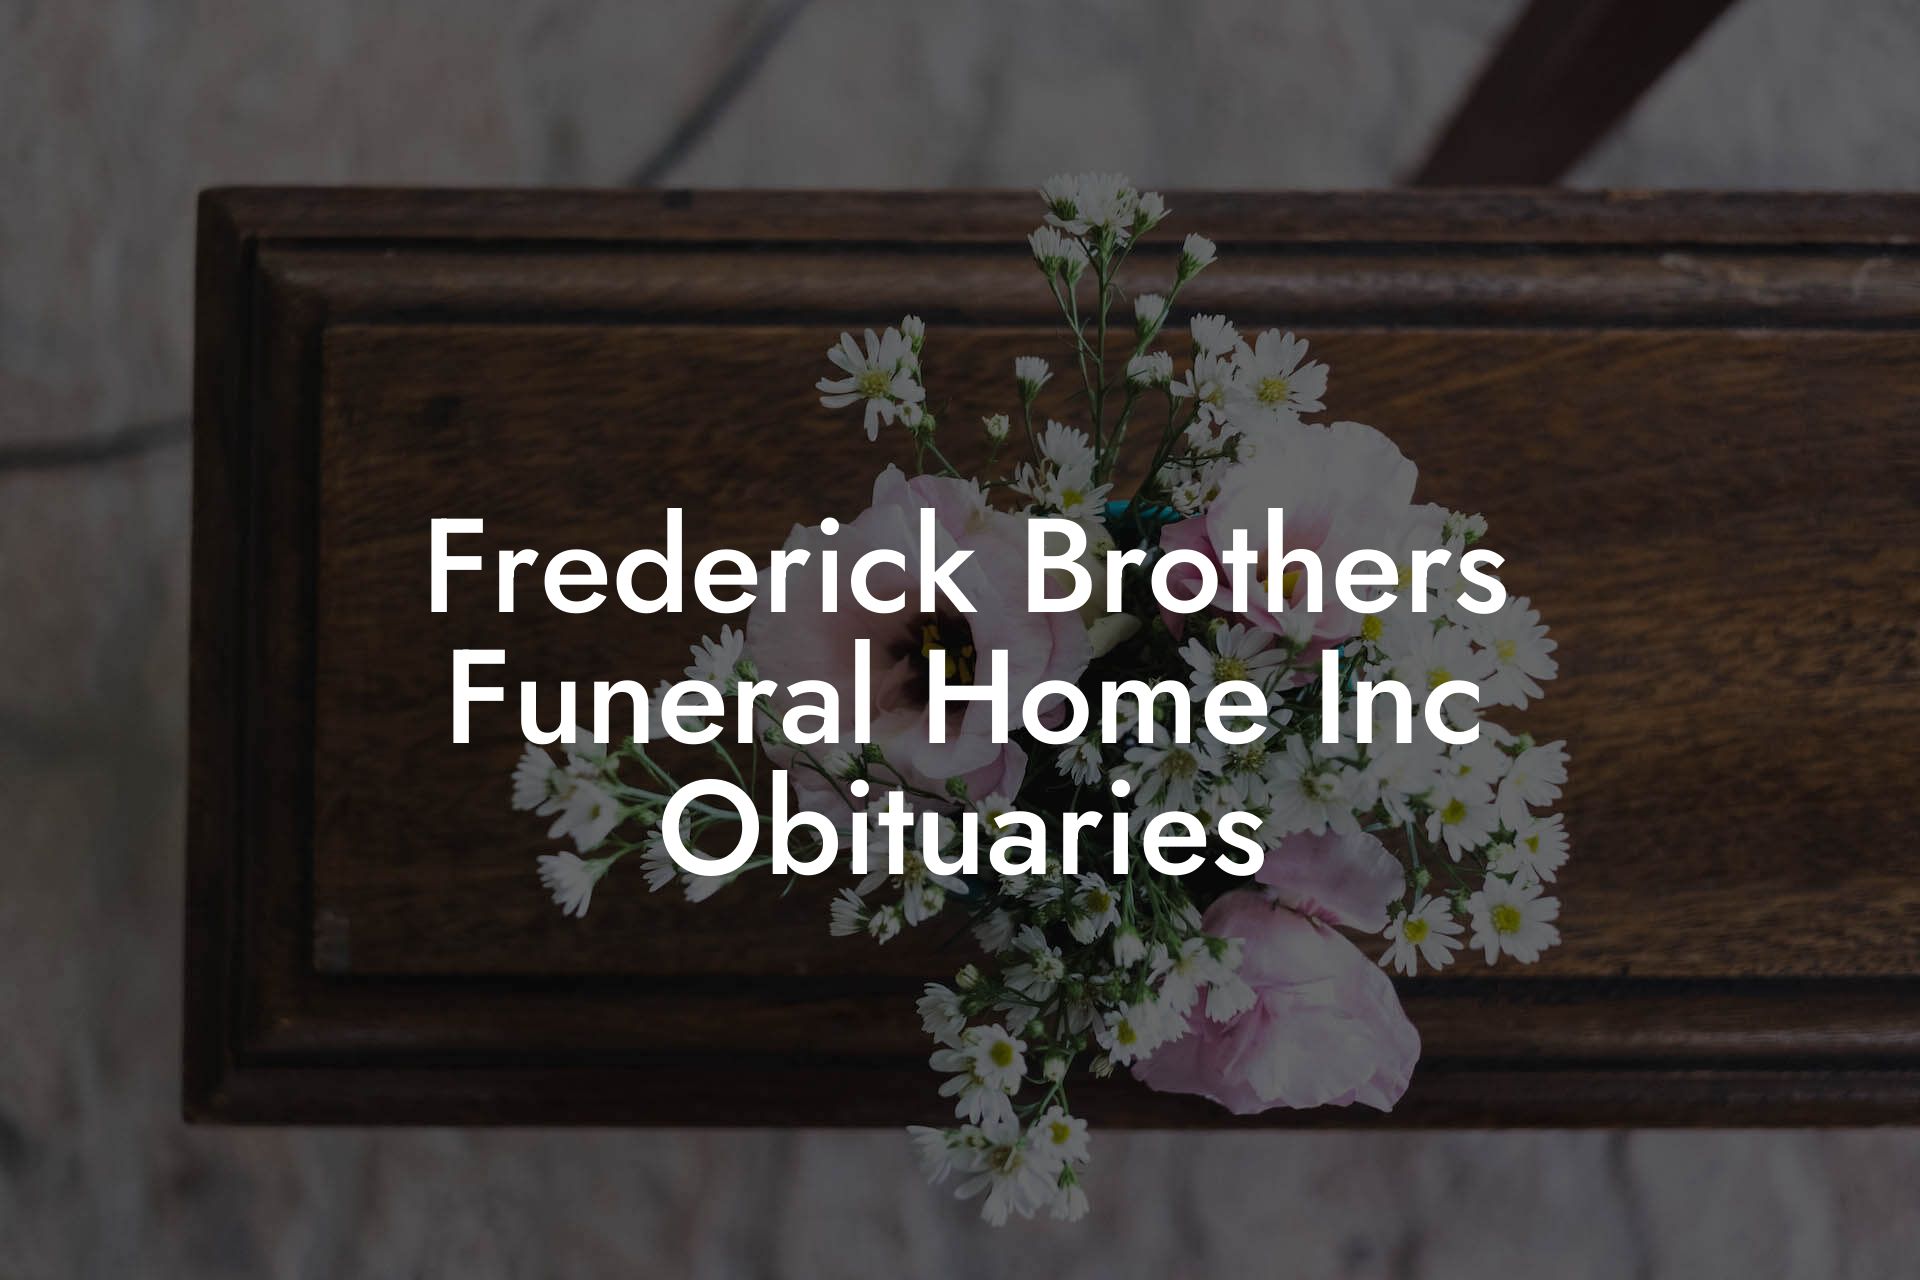 Frederick Brothers Funeral Home Inc Obituaries